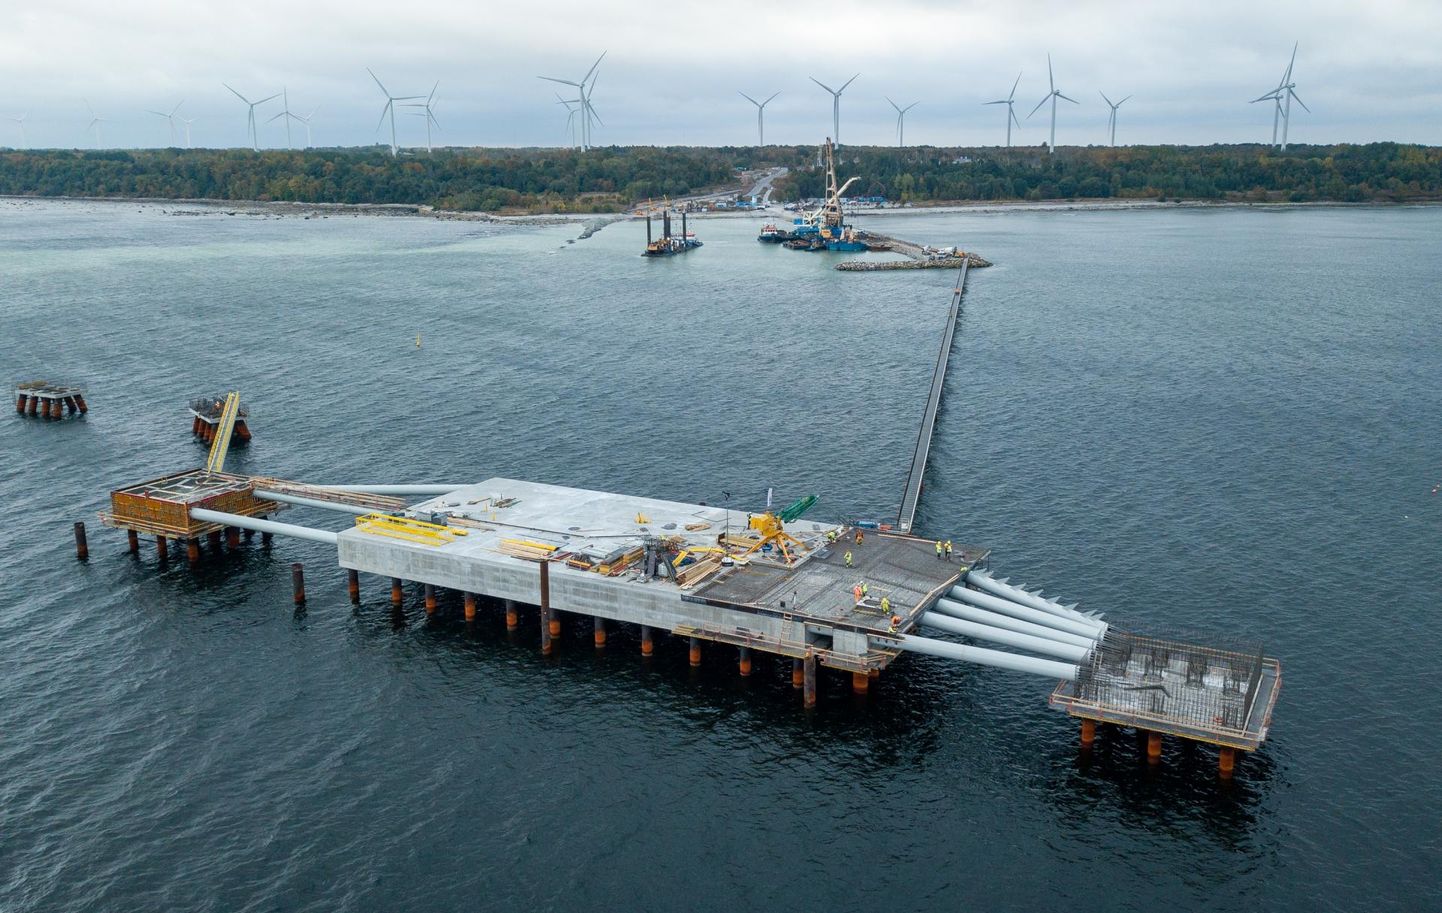 Paldiski liquefied natural gas dock construction. By now the pier is ready.